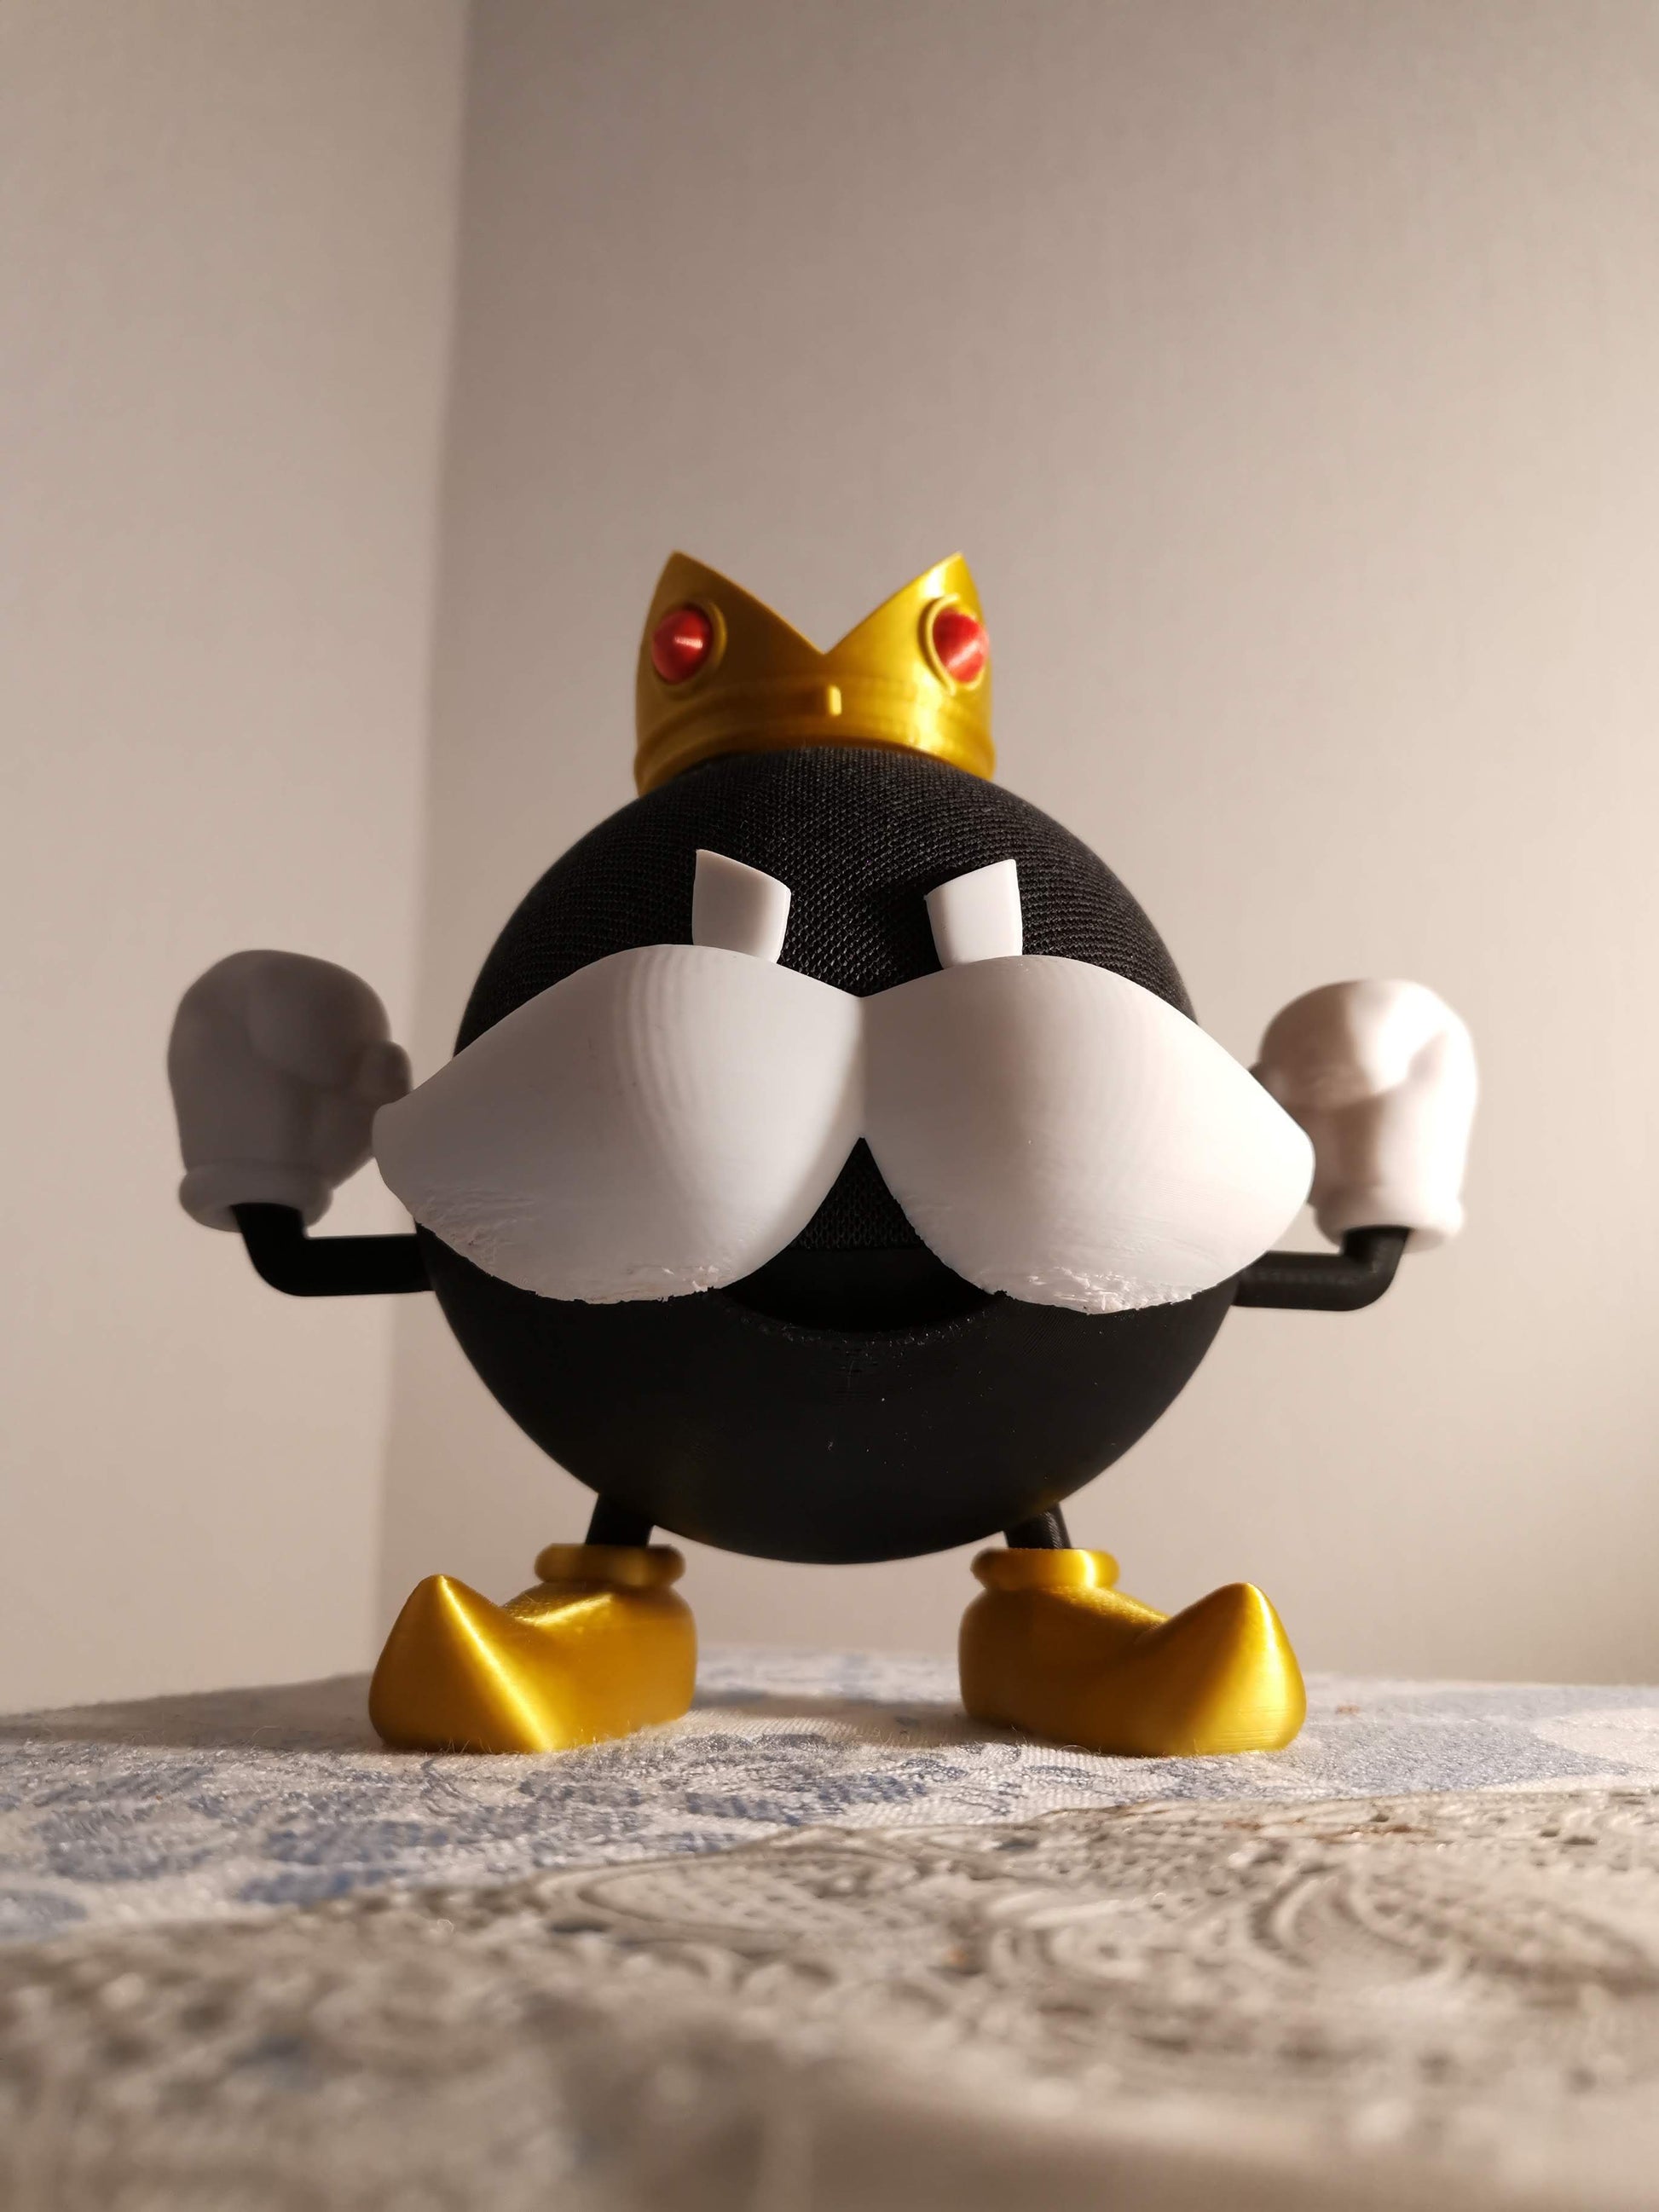 King Bomb-omb Alexa Echo holder with crown on top close up